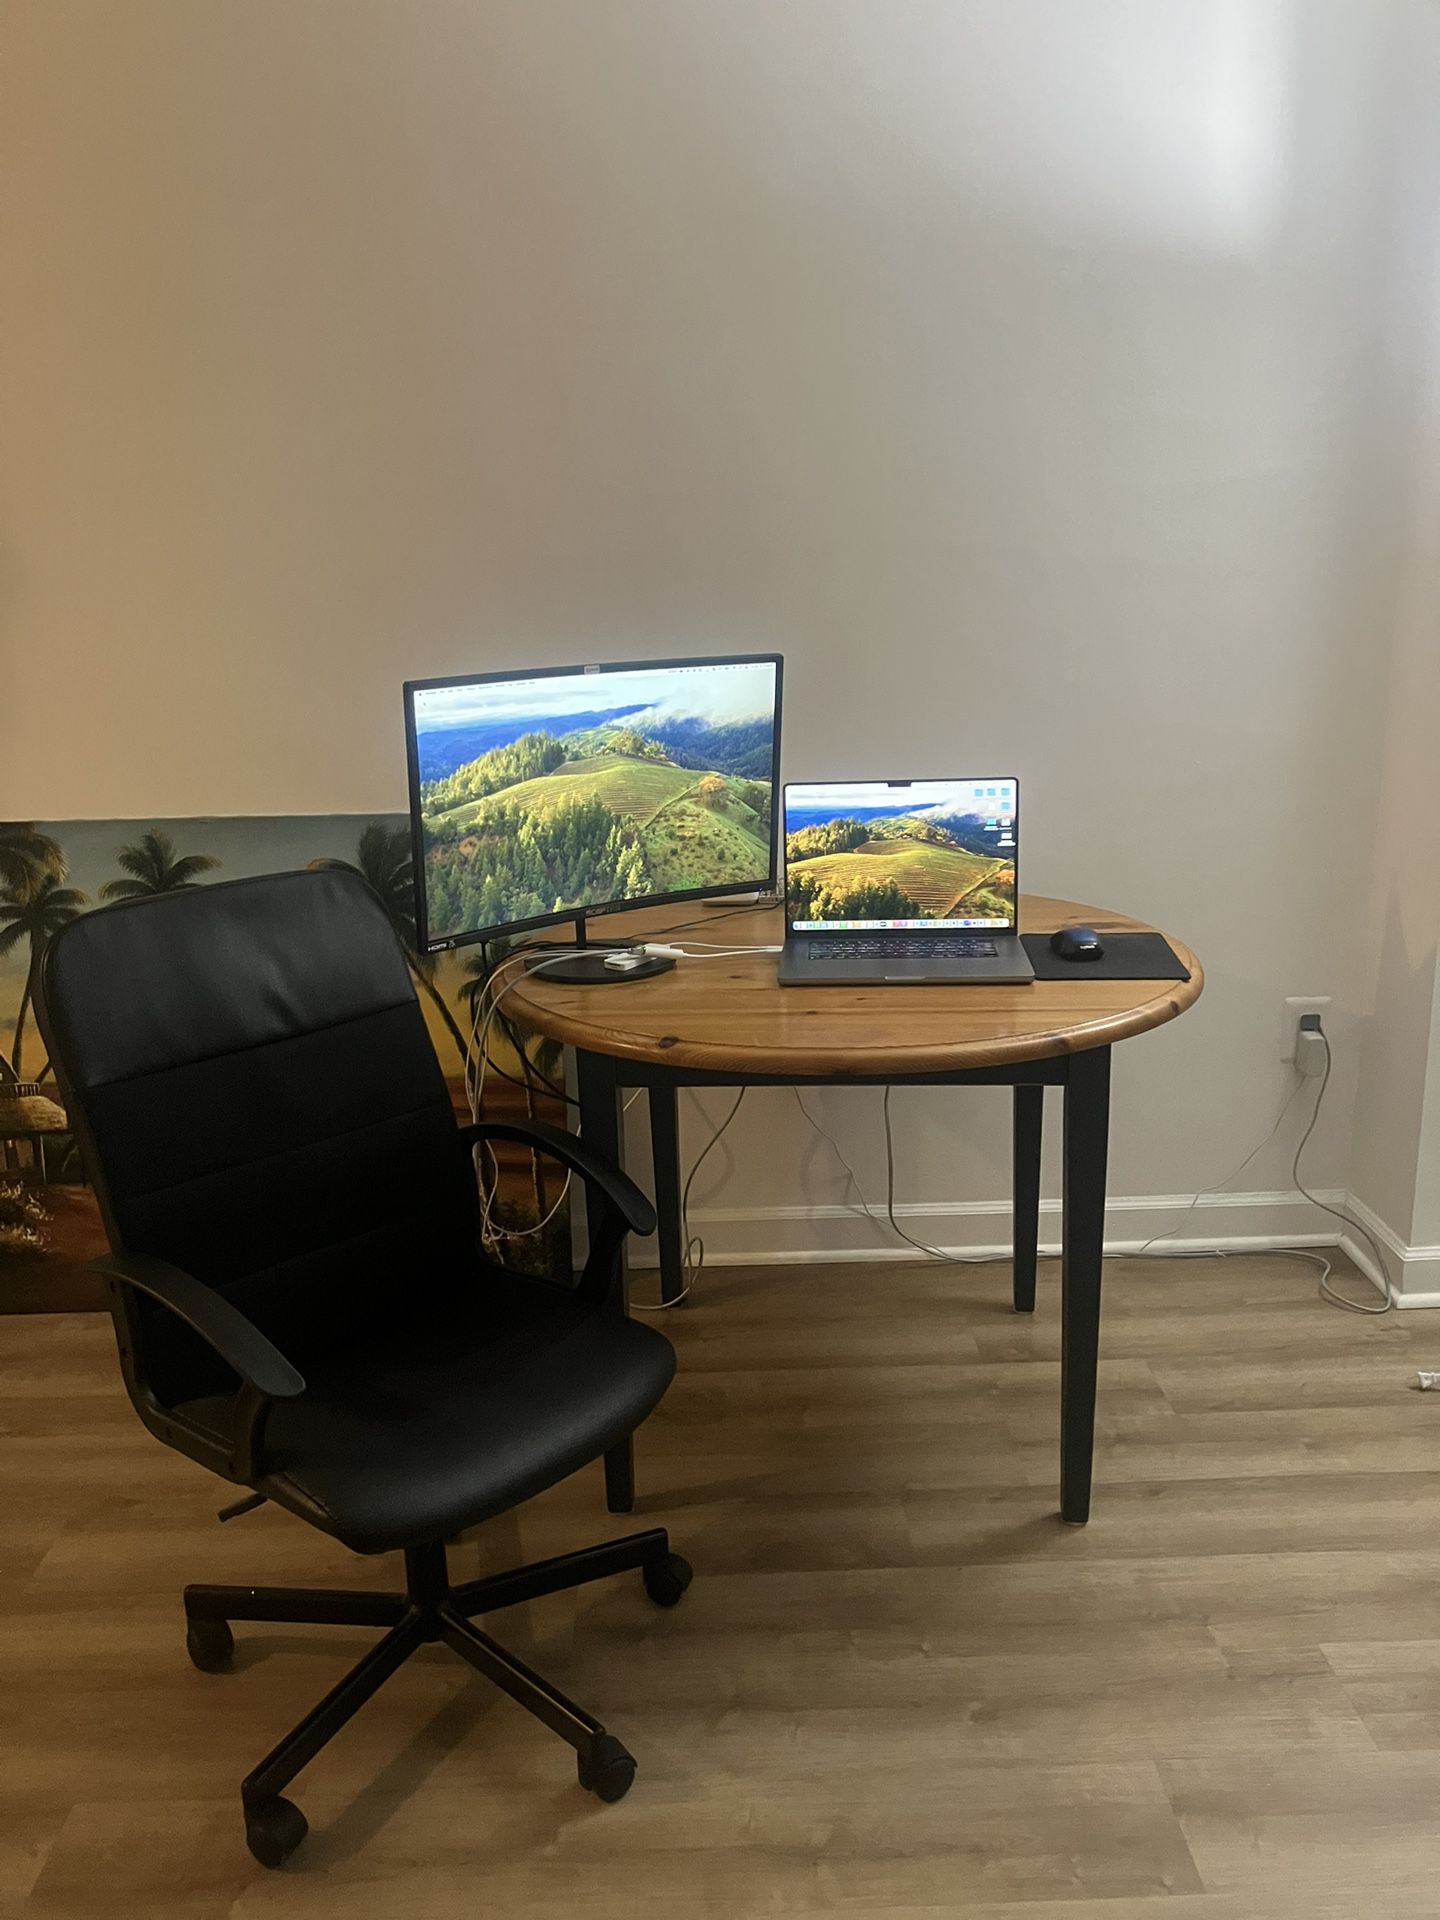 FREE DINING TABLE AND DESK CHAIR